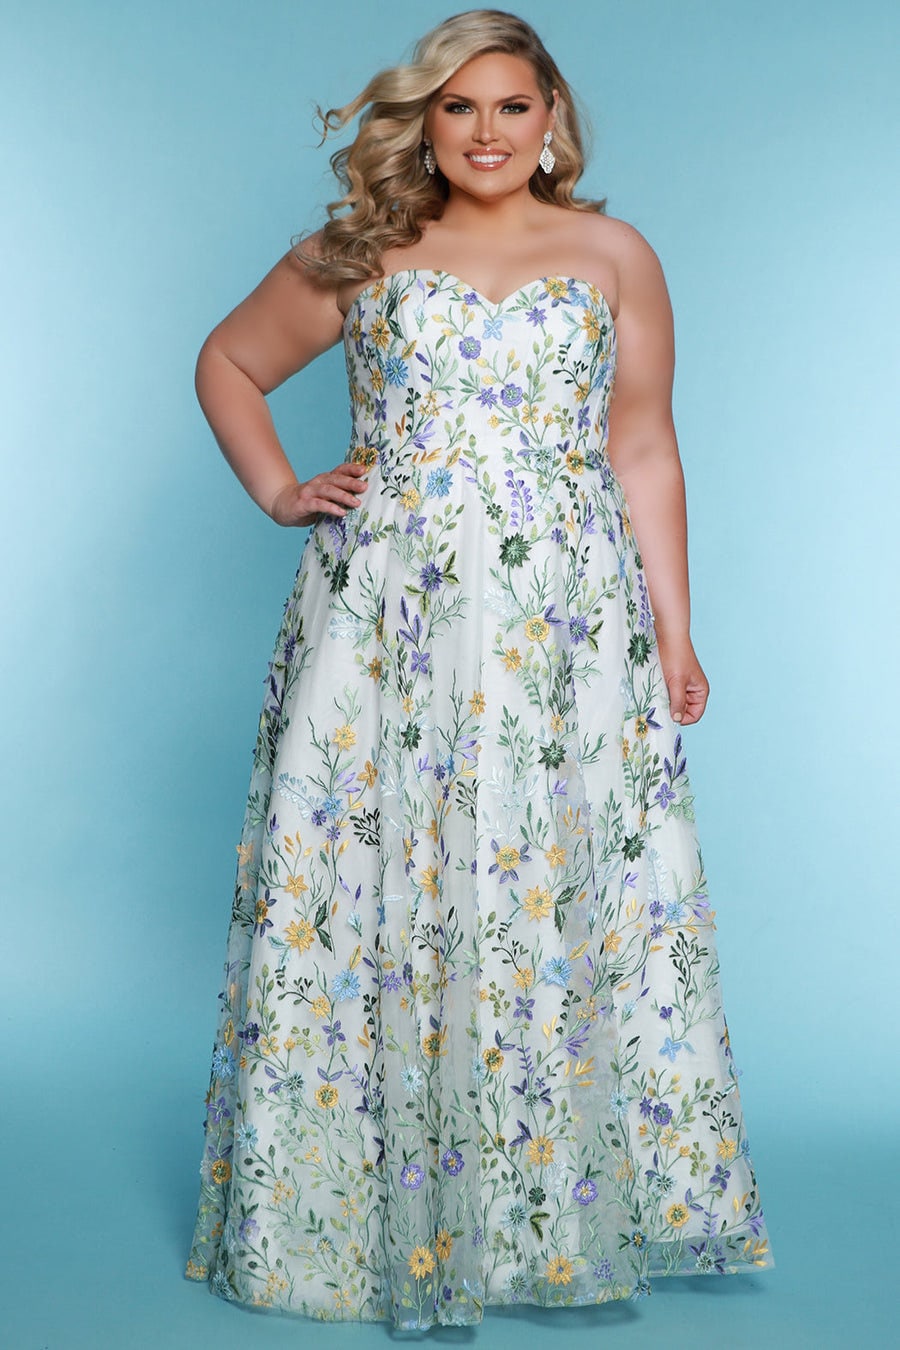 Floral Aline Plus Size Wedding Dress Bridal Gown Off The Shoulder Detachable Puff Sleeves Sleeveless Strapless Sweetheart Neckline Lace